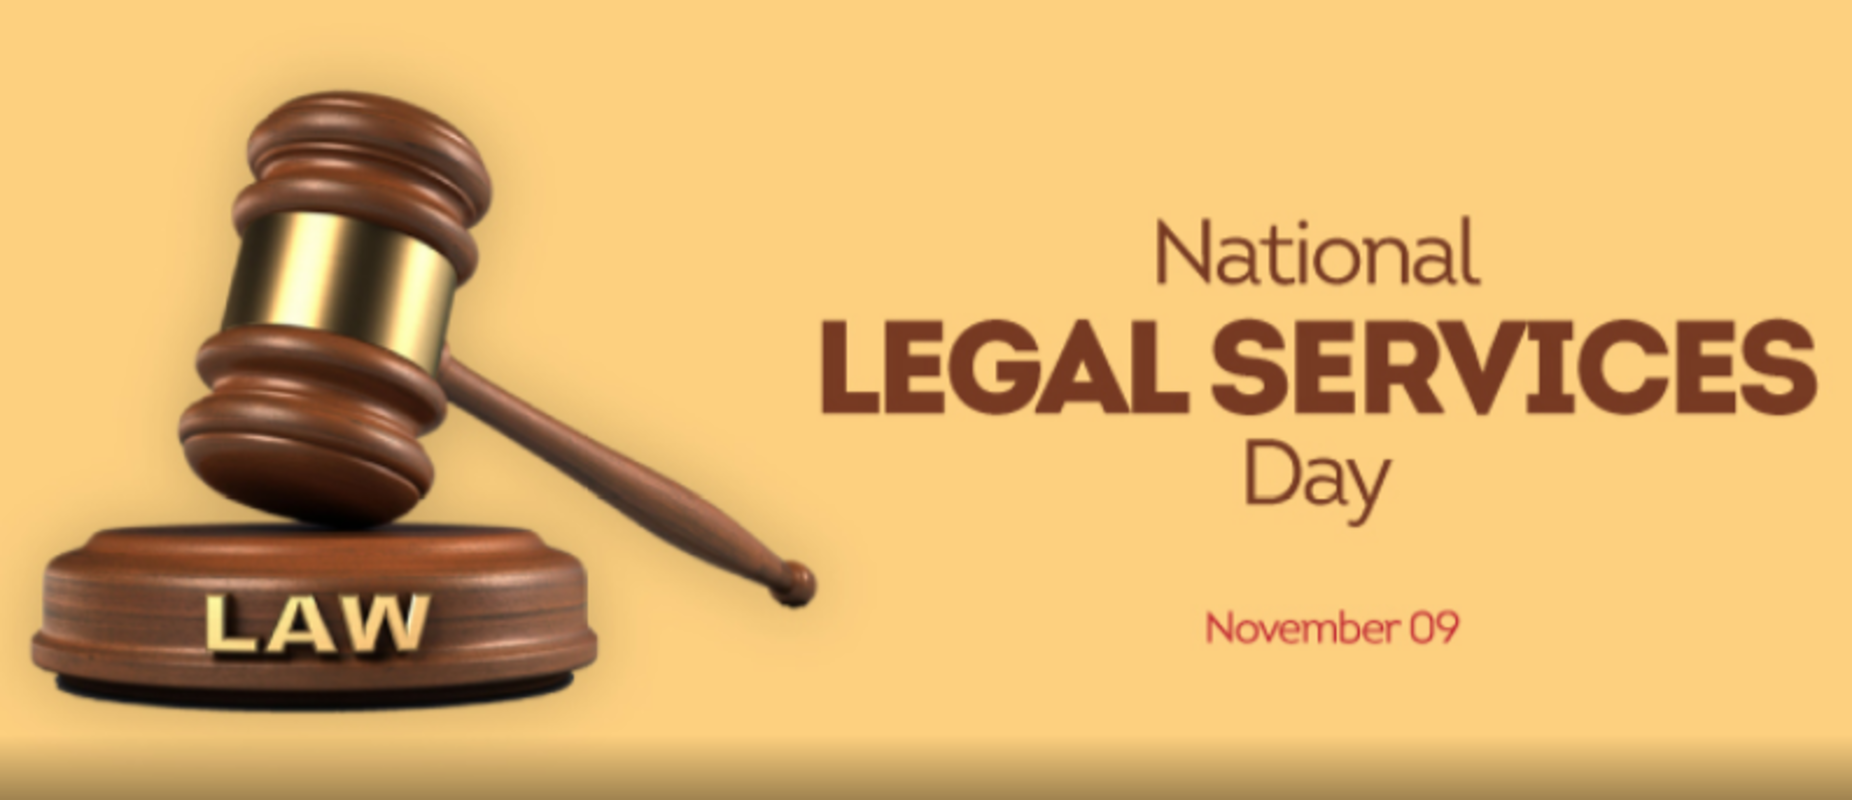 Legal Services Day 2021 Date, Theme, History, Significance, and everything you need to know